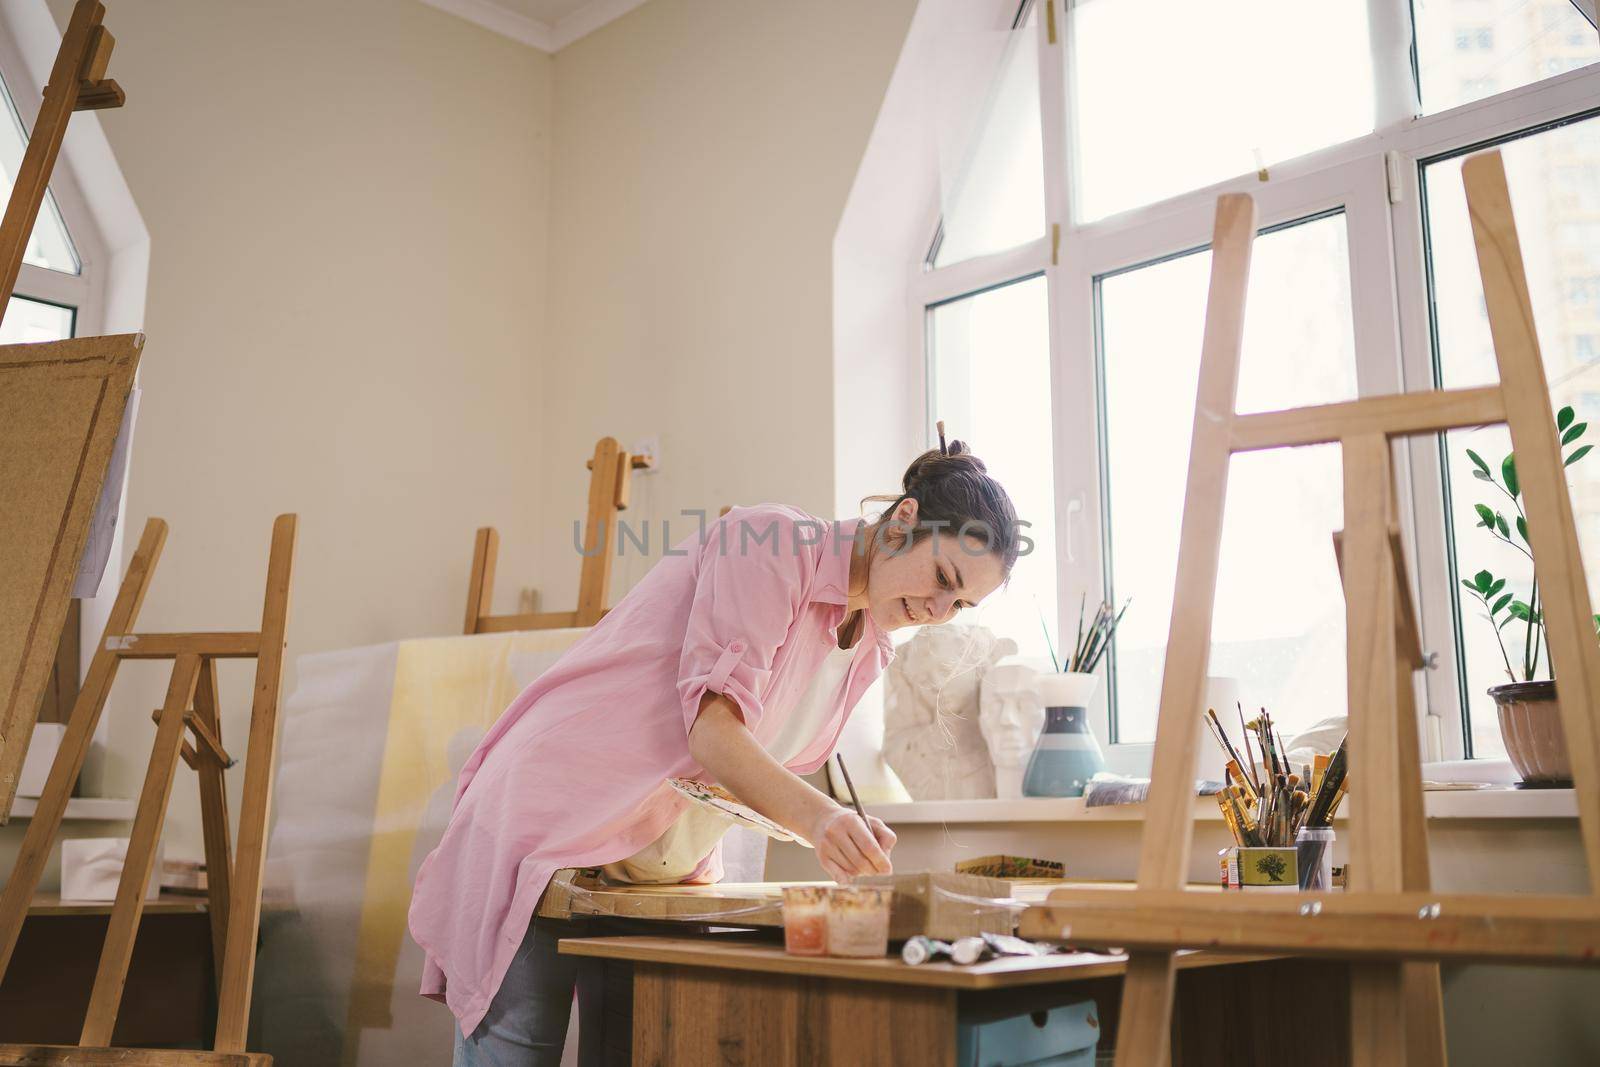 Female artist working in studio. Creative workspace, painting class, easel with canvas, art therapy. Inspiration, creativity, talent, craft concept. Artist studio interior. People, leisure and hobby by Tomashevska